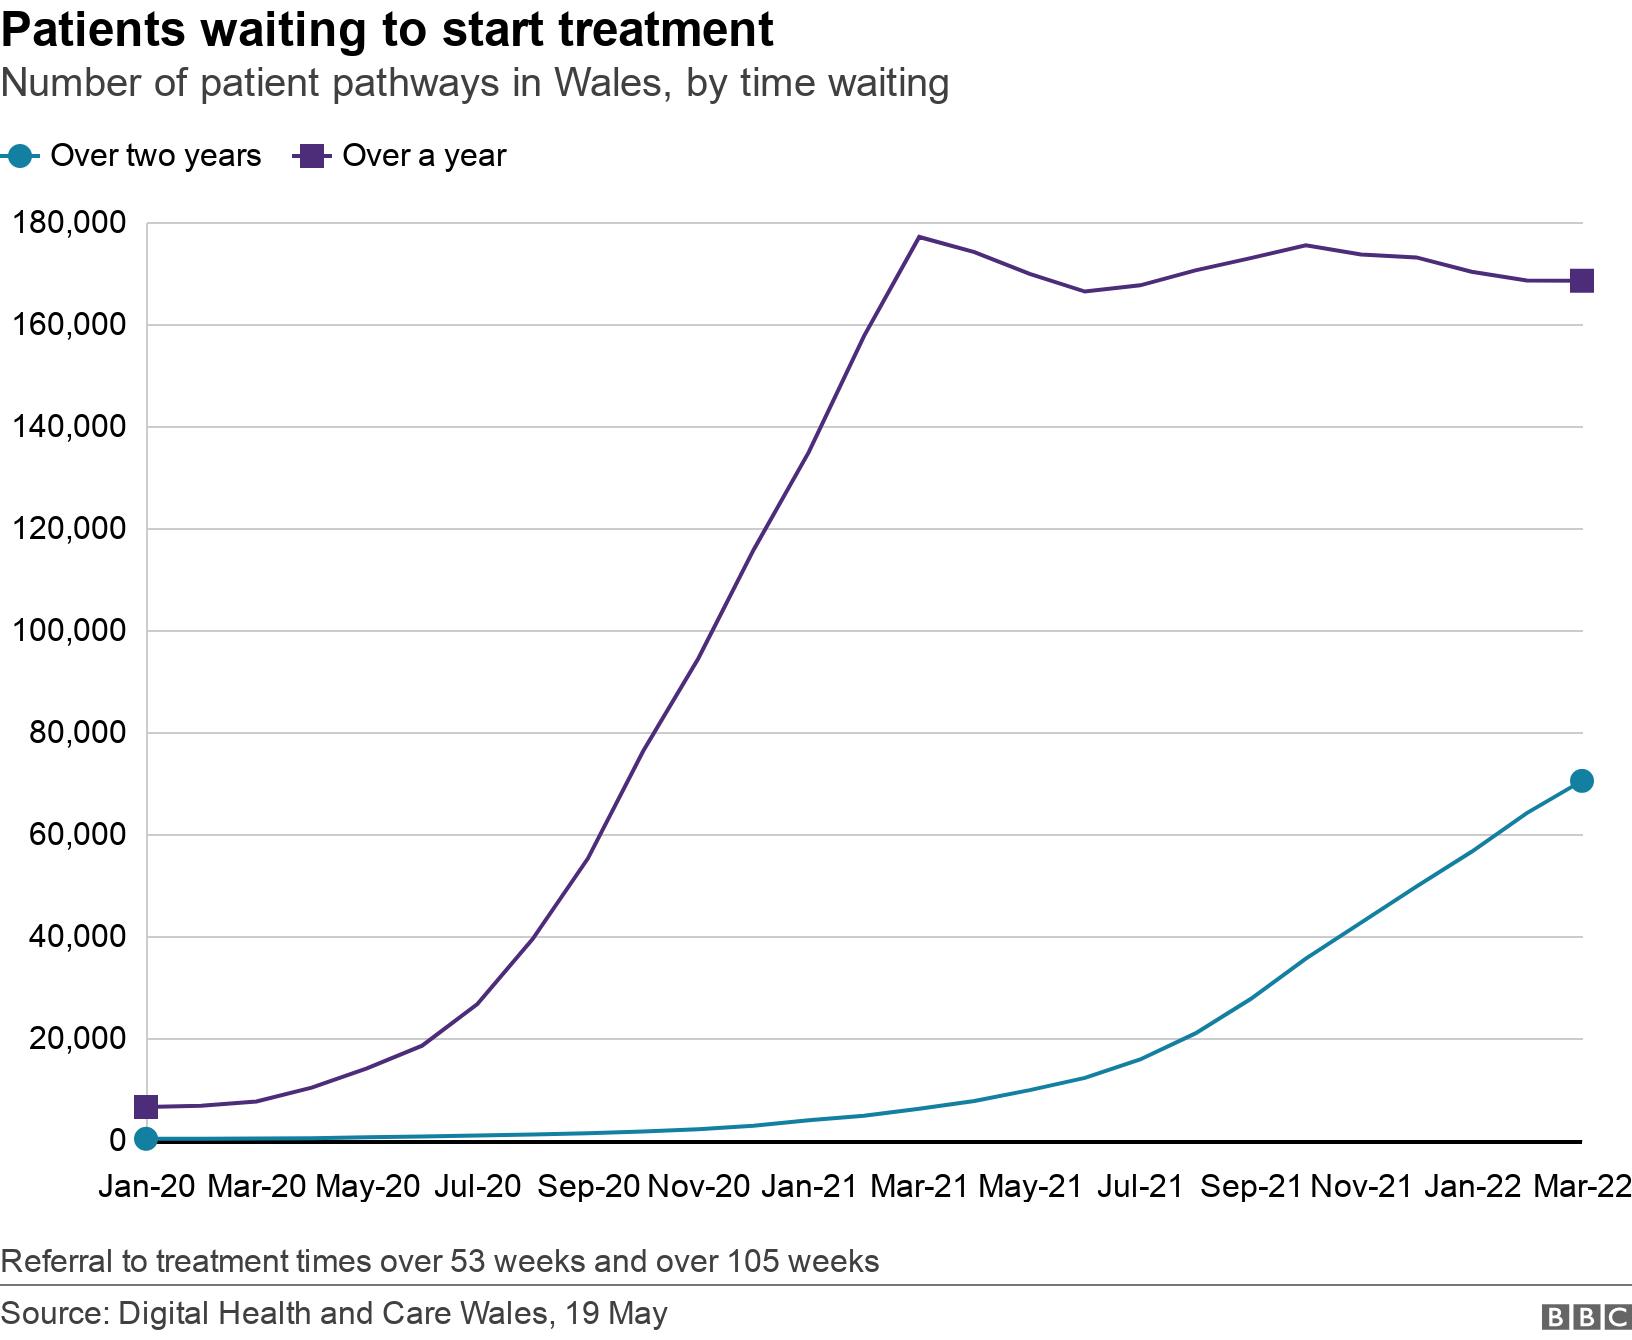 Patients waiting to start treatment. Number of patient pathways in Wales, by time waiting.  Referral to treatment times over 53 weeks and over 105 weeks.